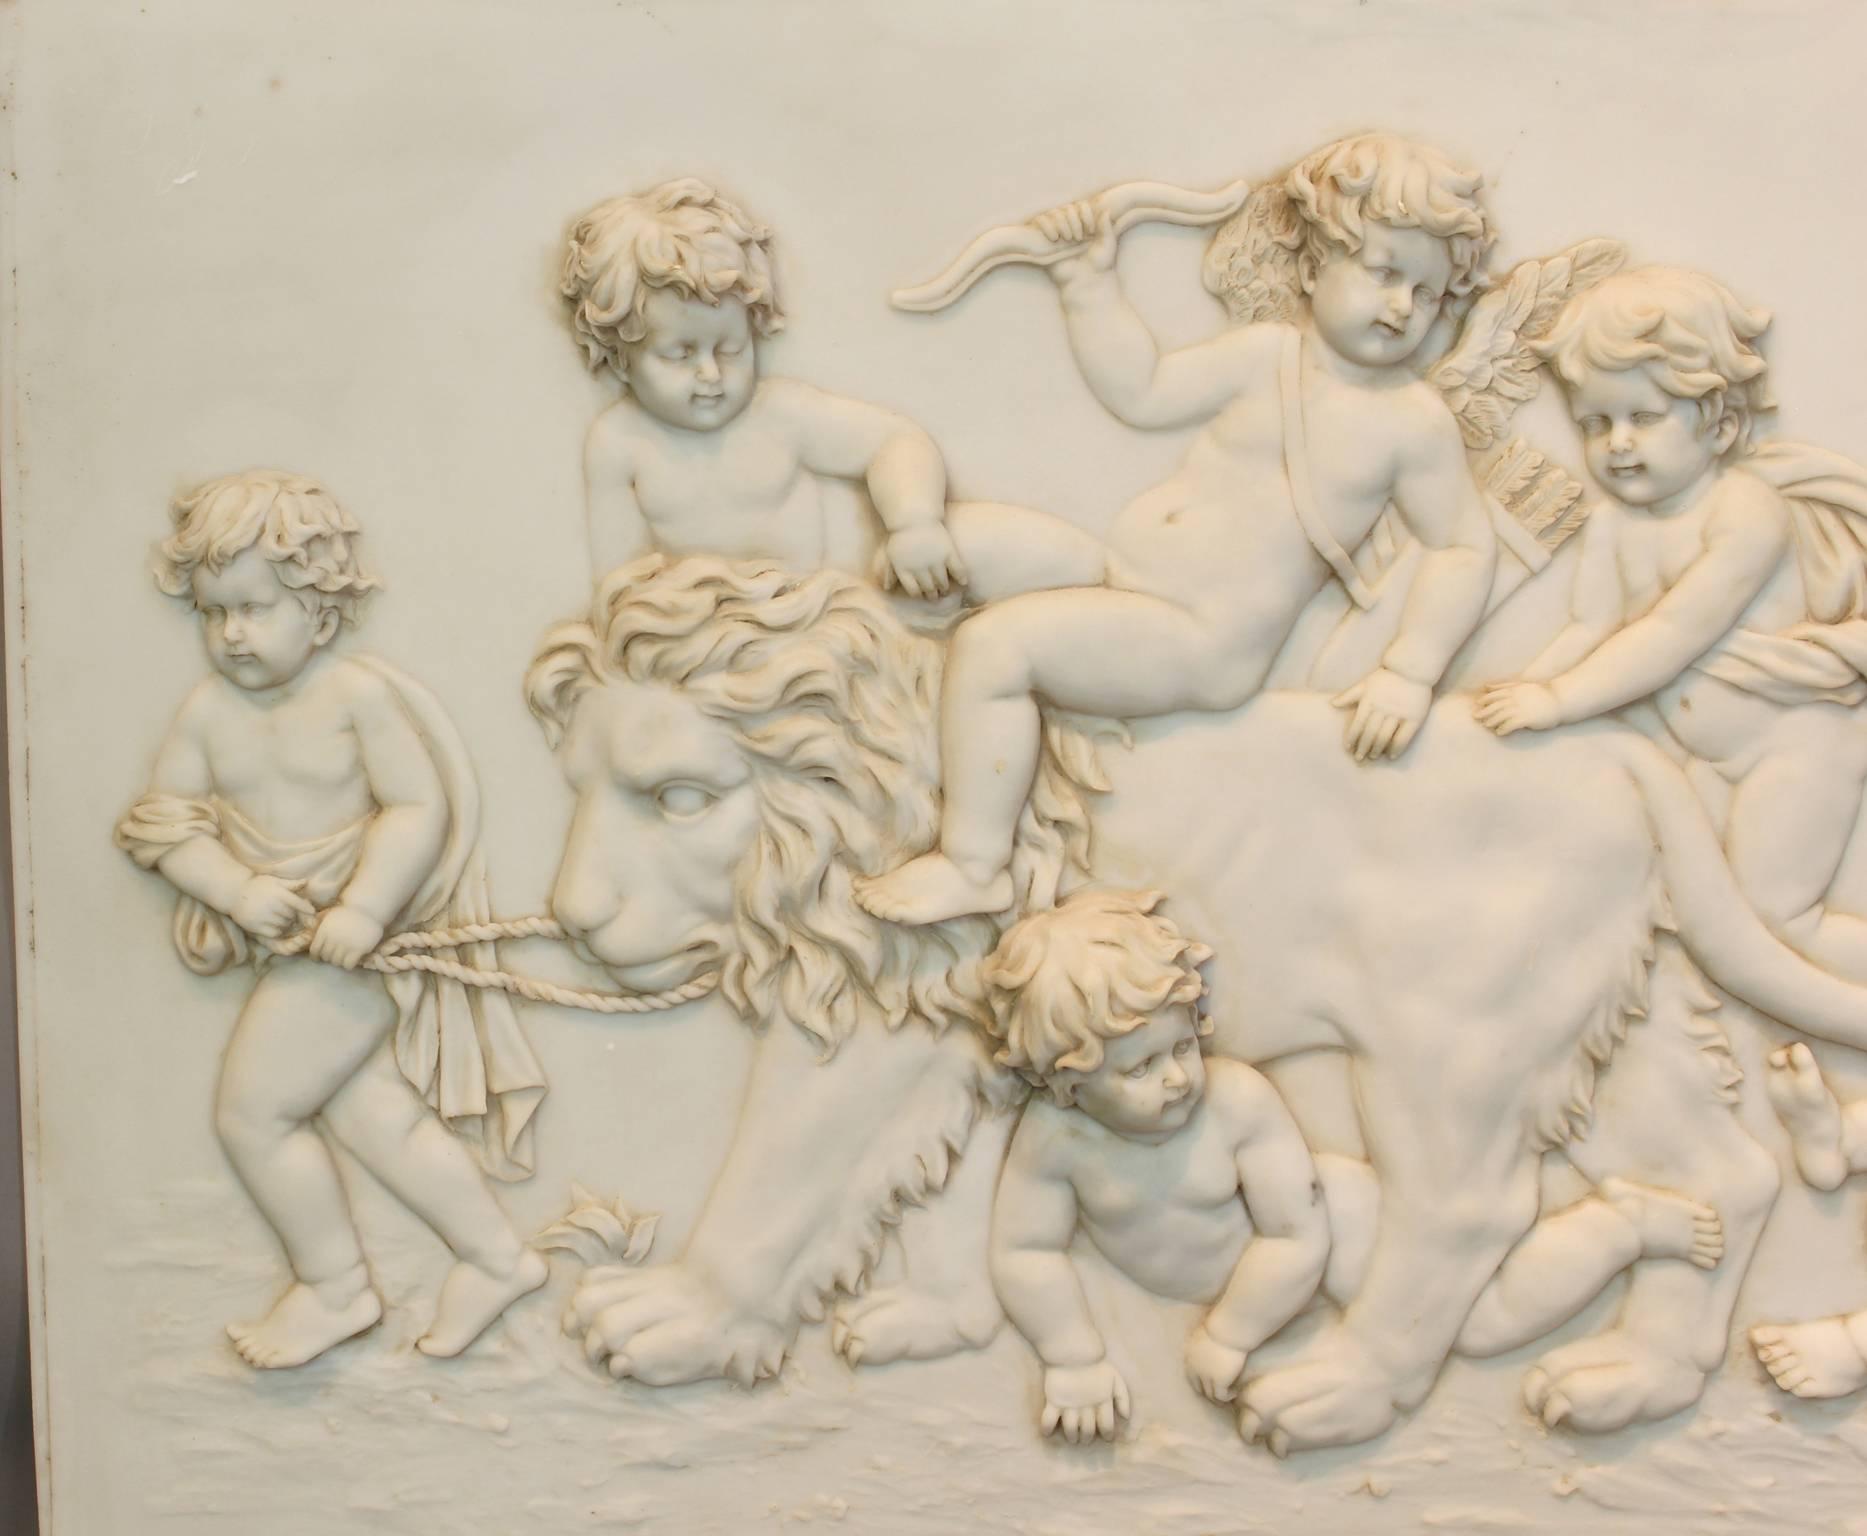 A large and dramatic Parian ware plaque dating from the late 19th century. depicting frolicking cherubs surrounding a tethered lion. Unsigned, possible by the Art Union of London.